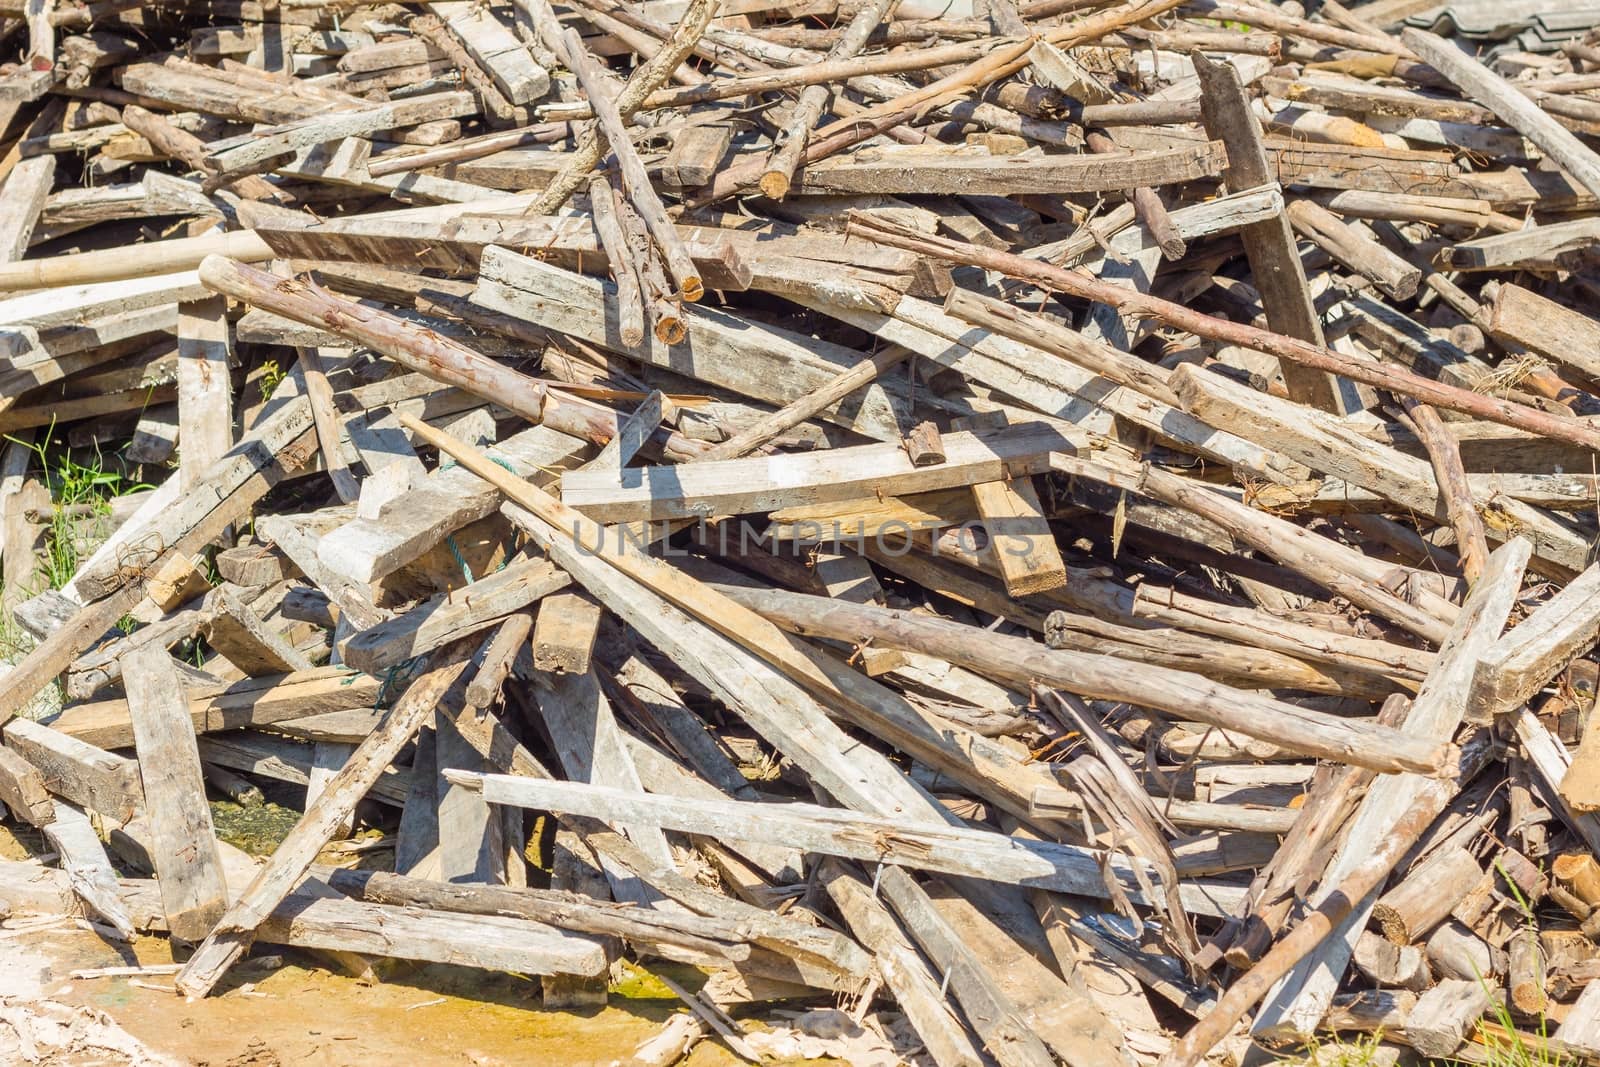 Waste wood pile abandon on the ground by a3701027